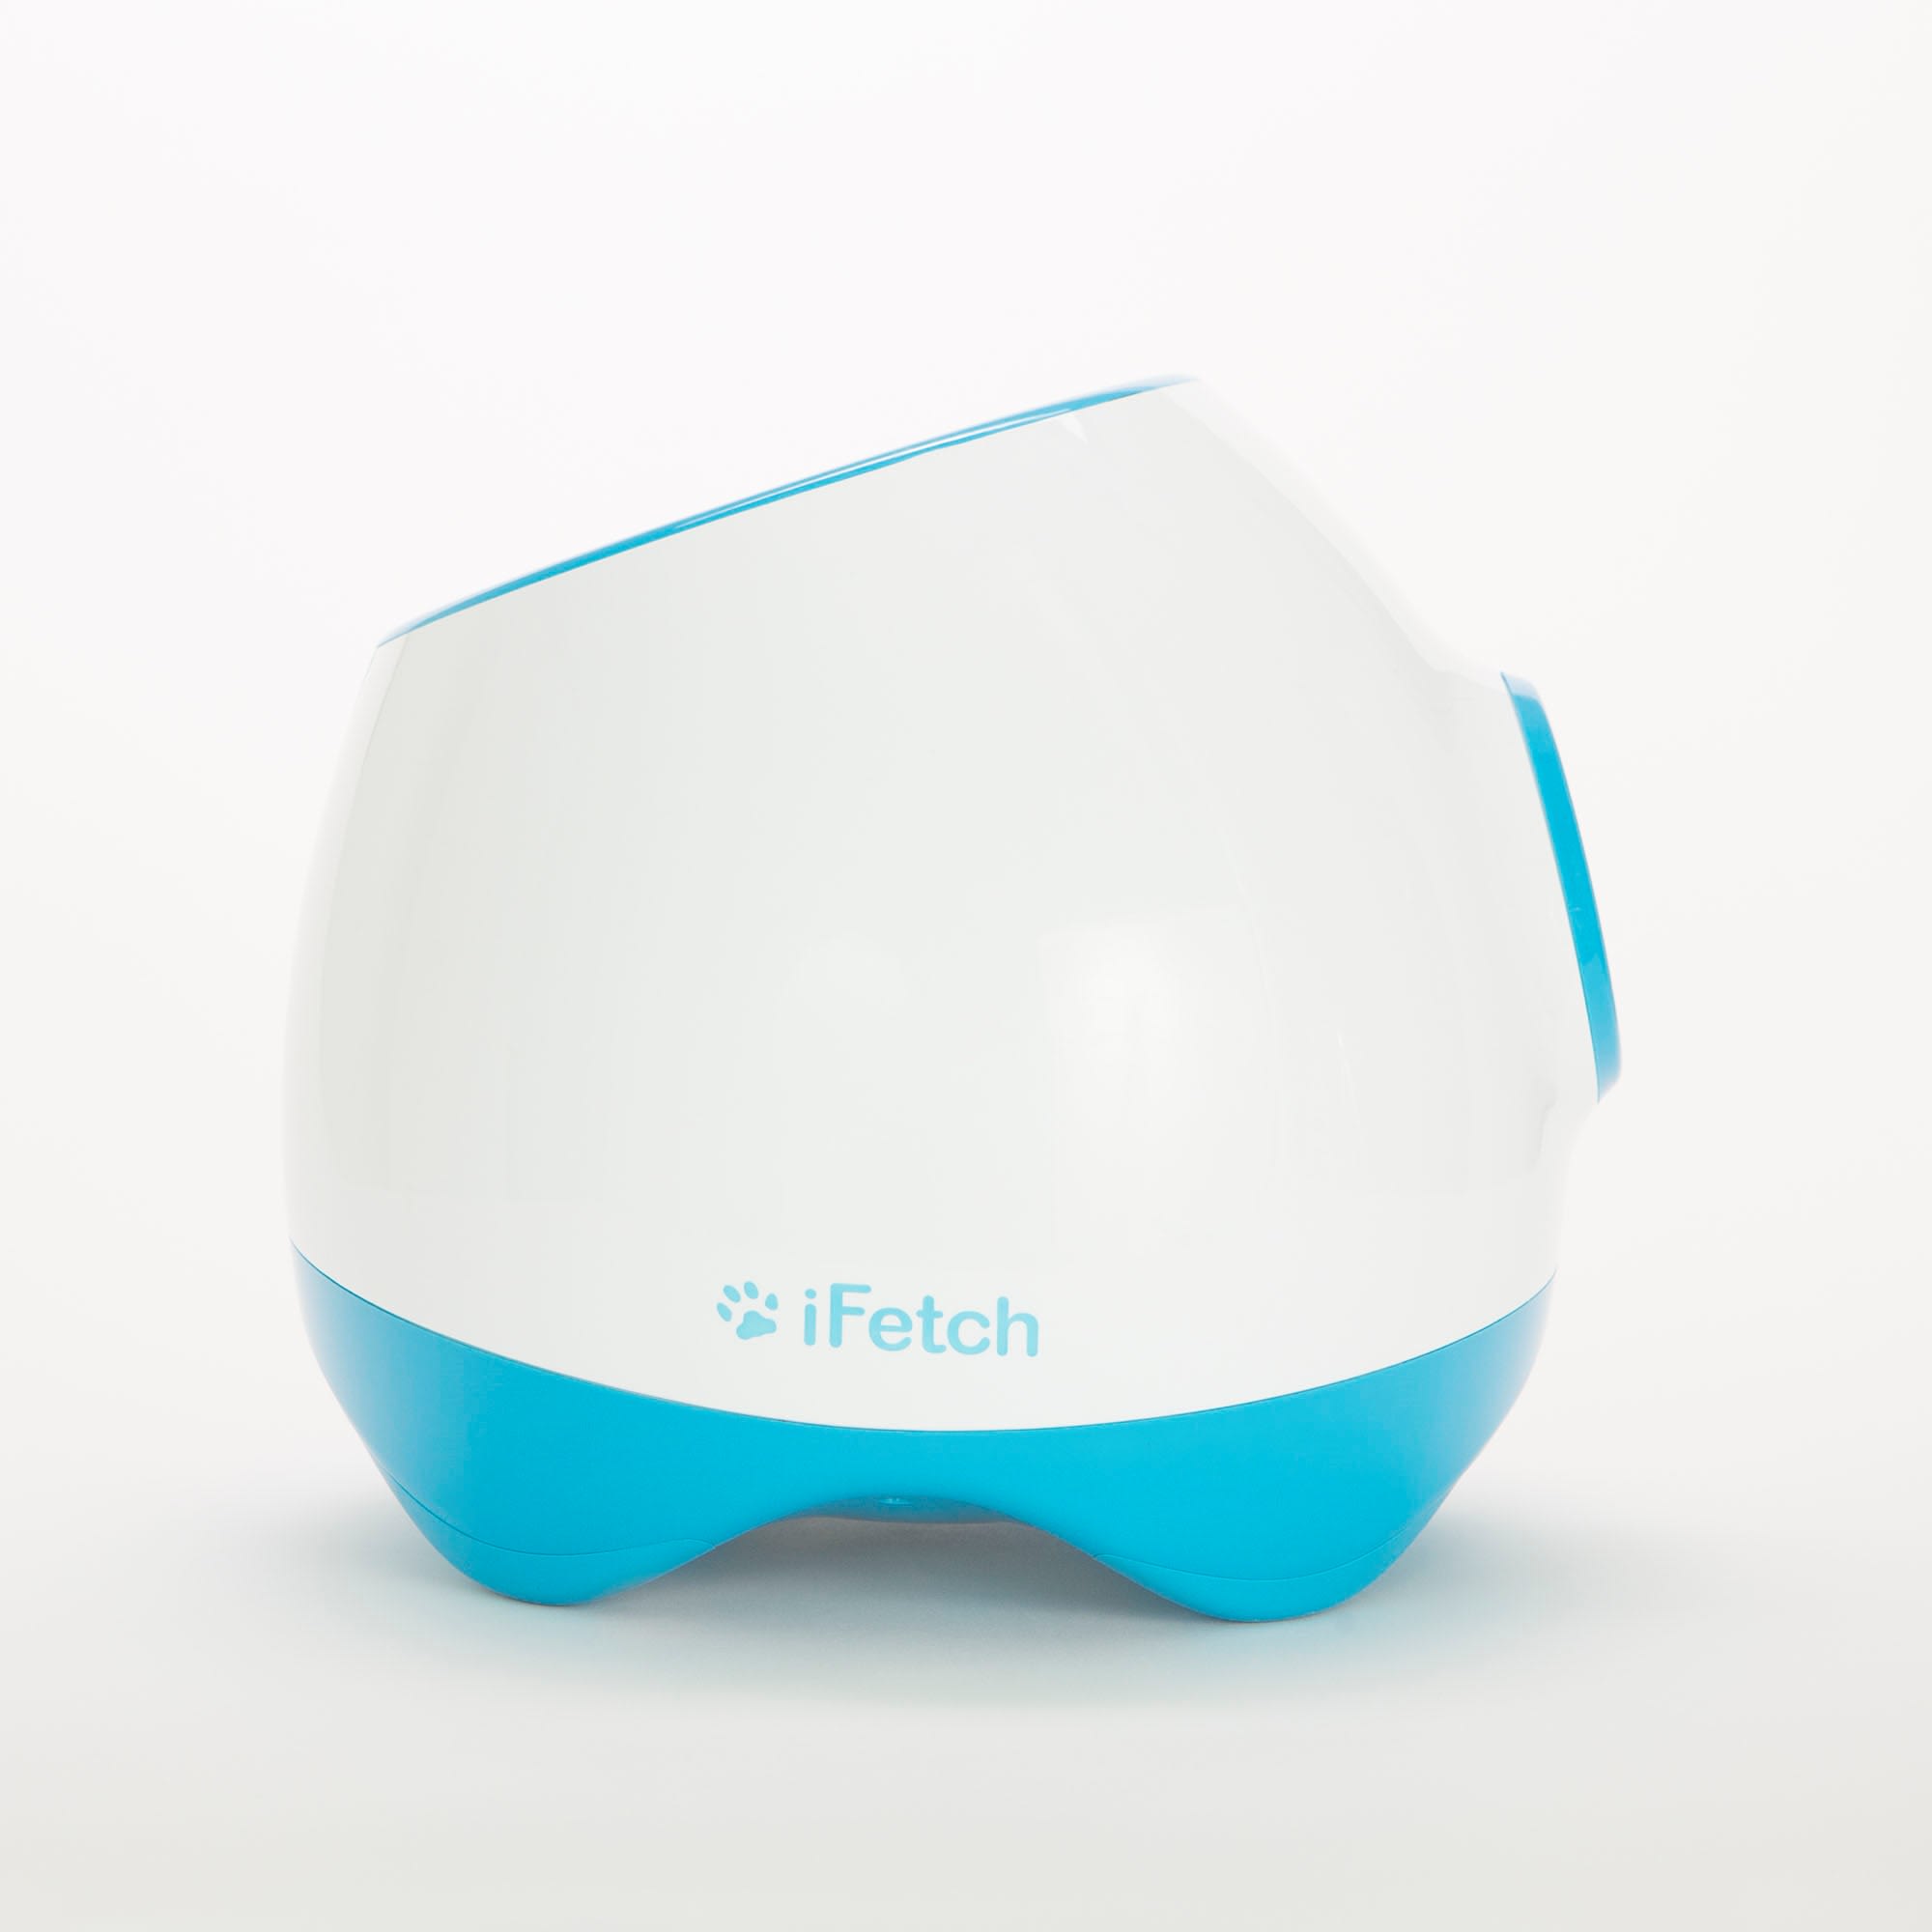 ifetch for sale